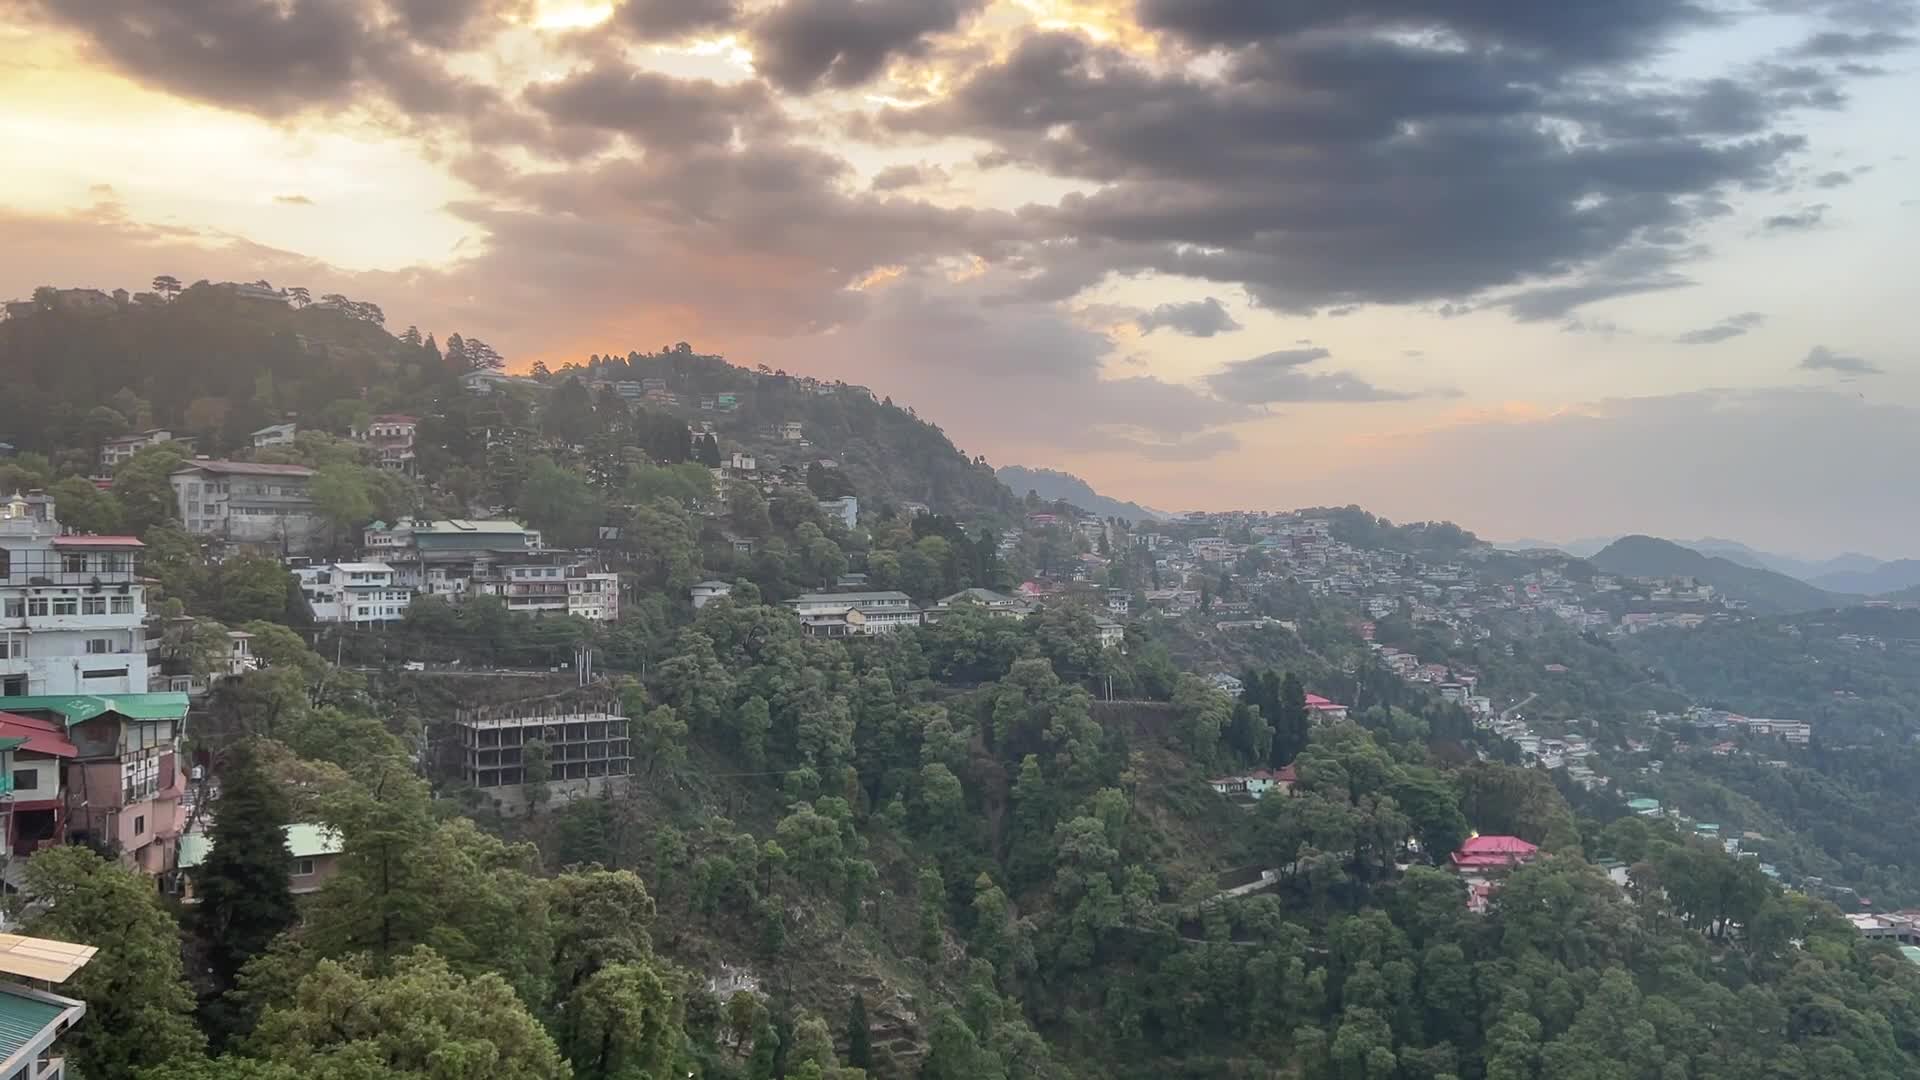 Sunrise over the hill station of Mussoorie